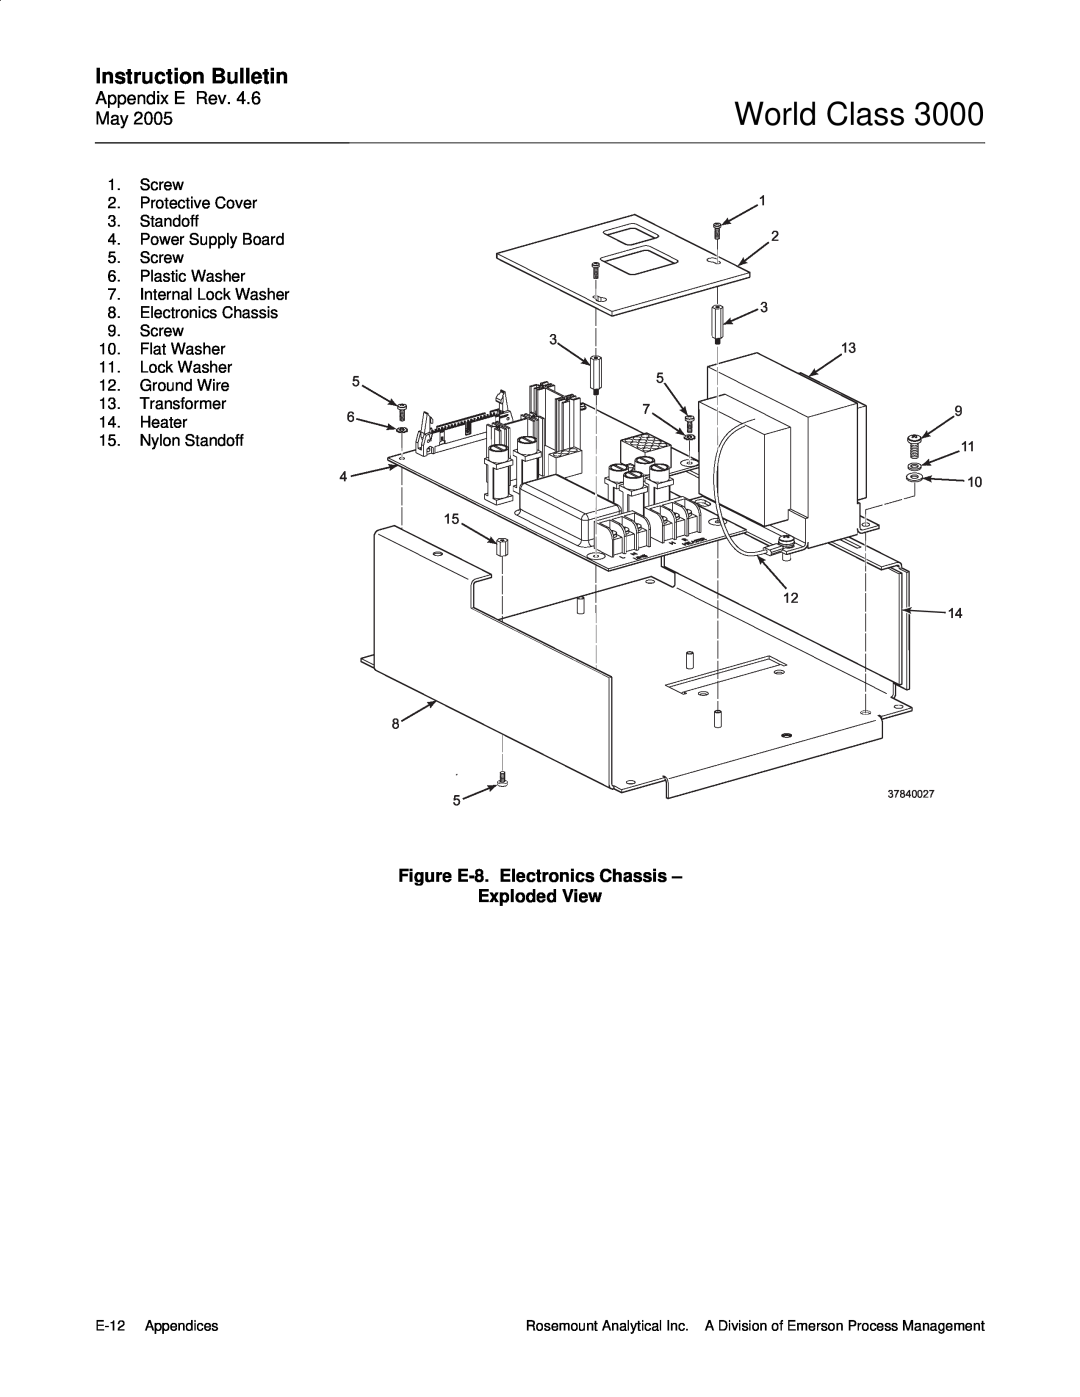 Emerson 3000 instruction manual World Class, Instruction Bulletin, Figure E-8.Electronics Chassis – Exploded View 